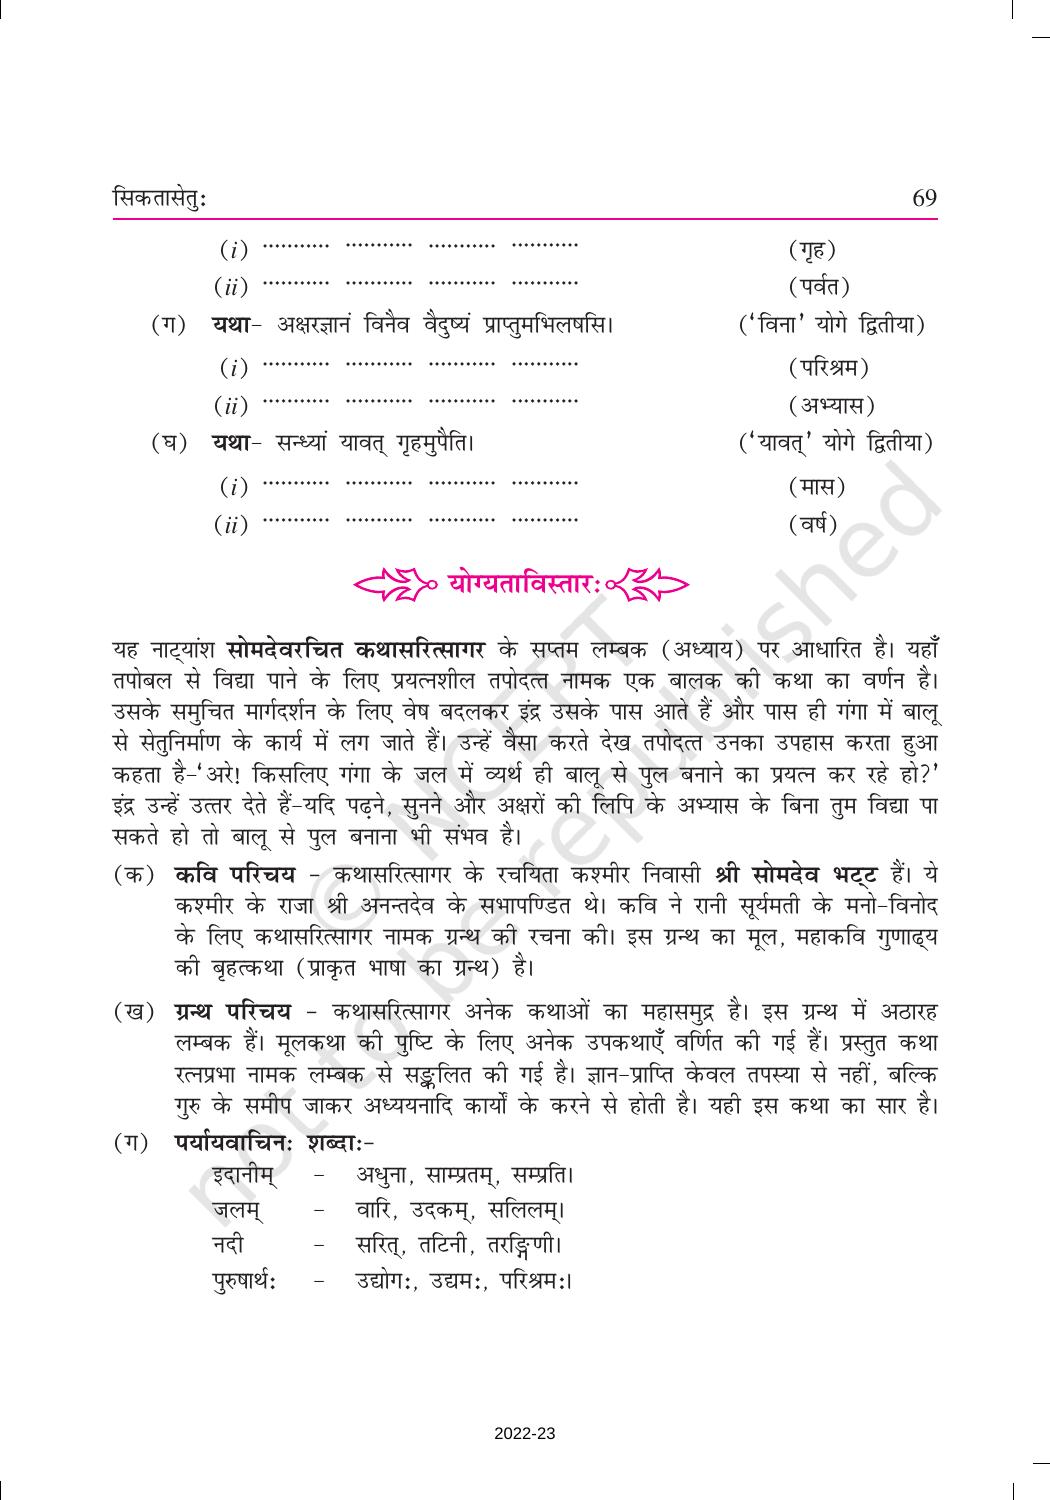 NCERT Book for Class 9 Sanskrit Shemushi Chapter 9 सिकतासेतुः - Page 7